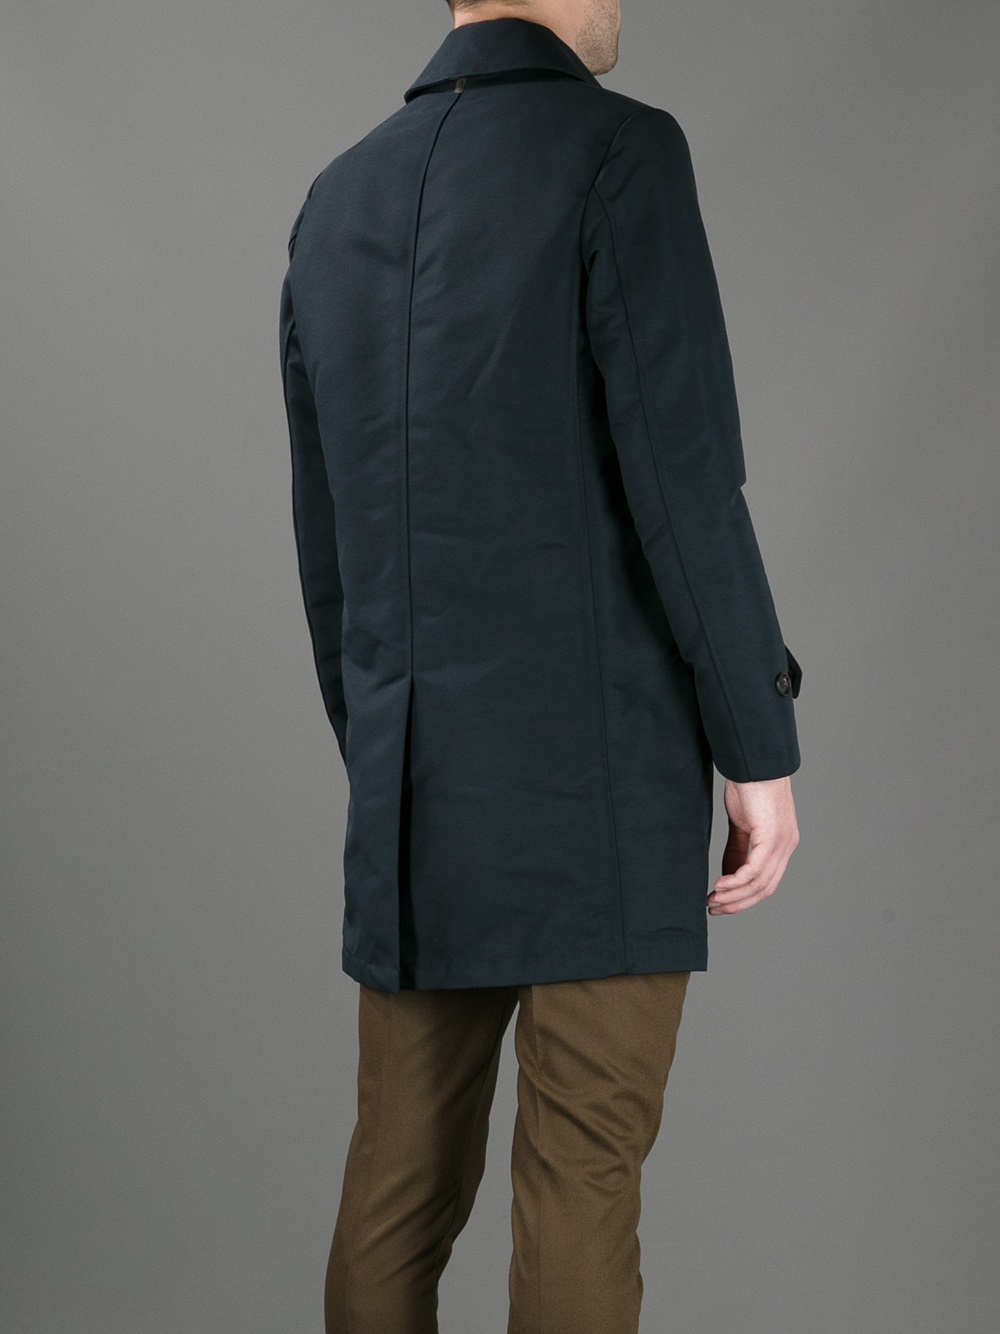 Dondup Midlength Trench Coat in Blue for Men - Lyst